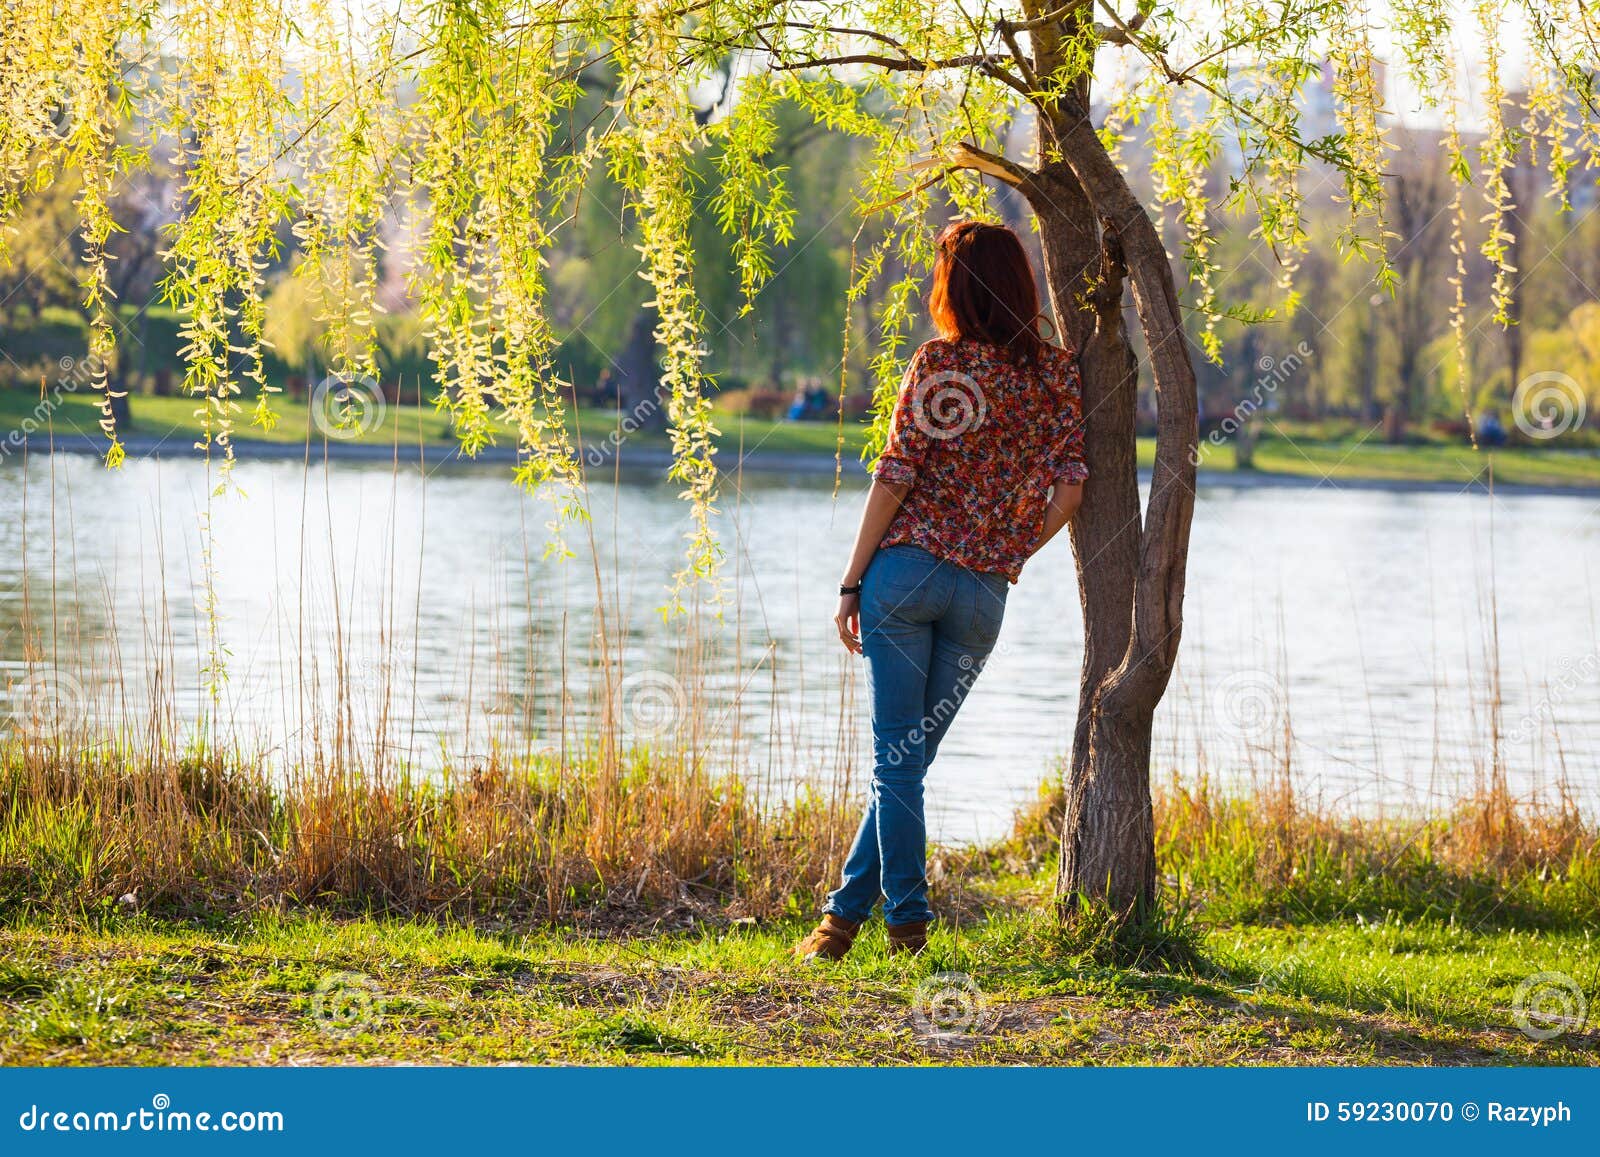 Girl Leaning Against a Tree, Pensive Stock Photo - Image of outdoors ...